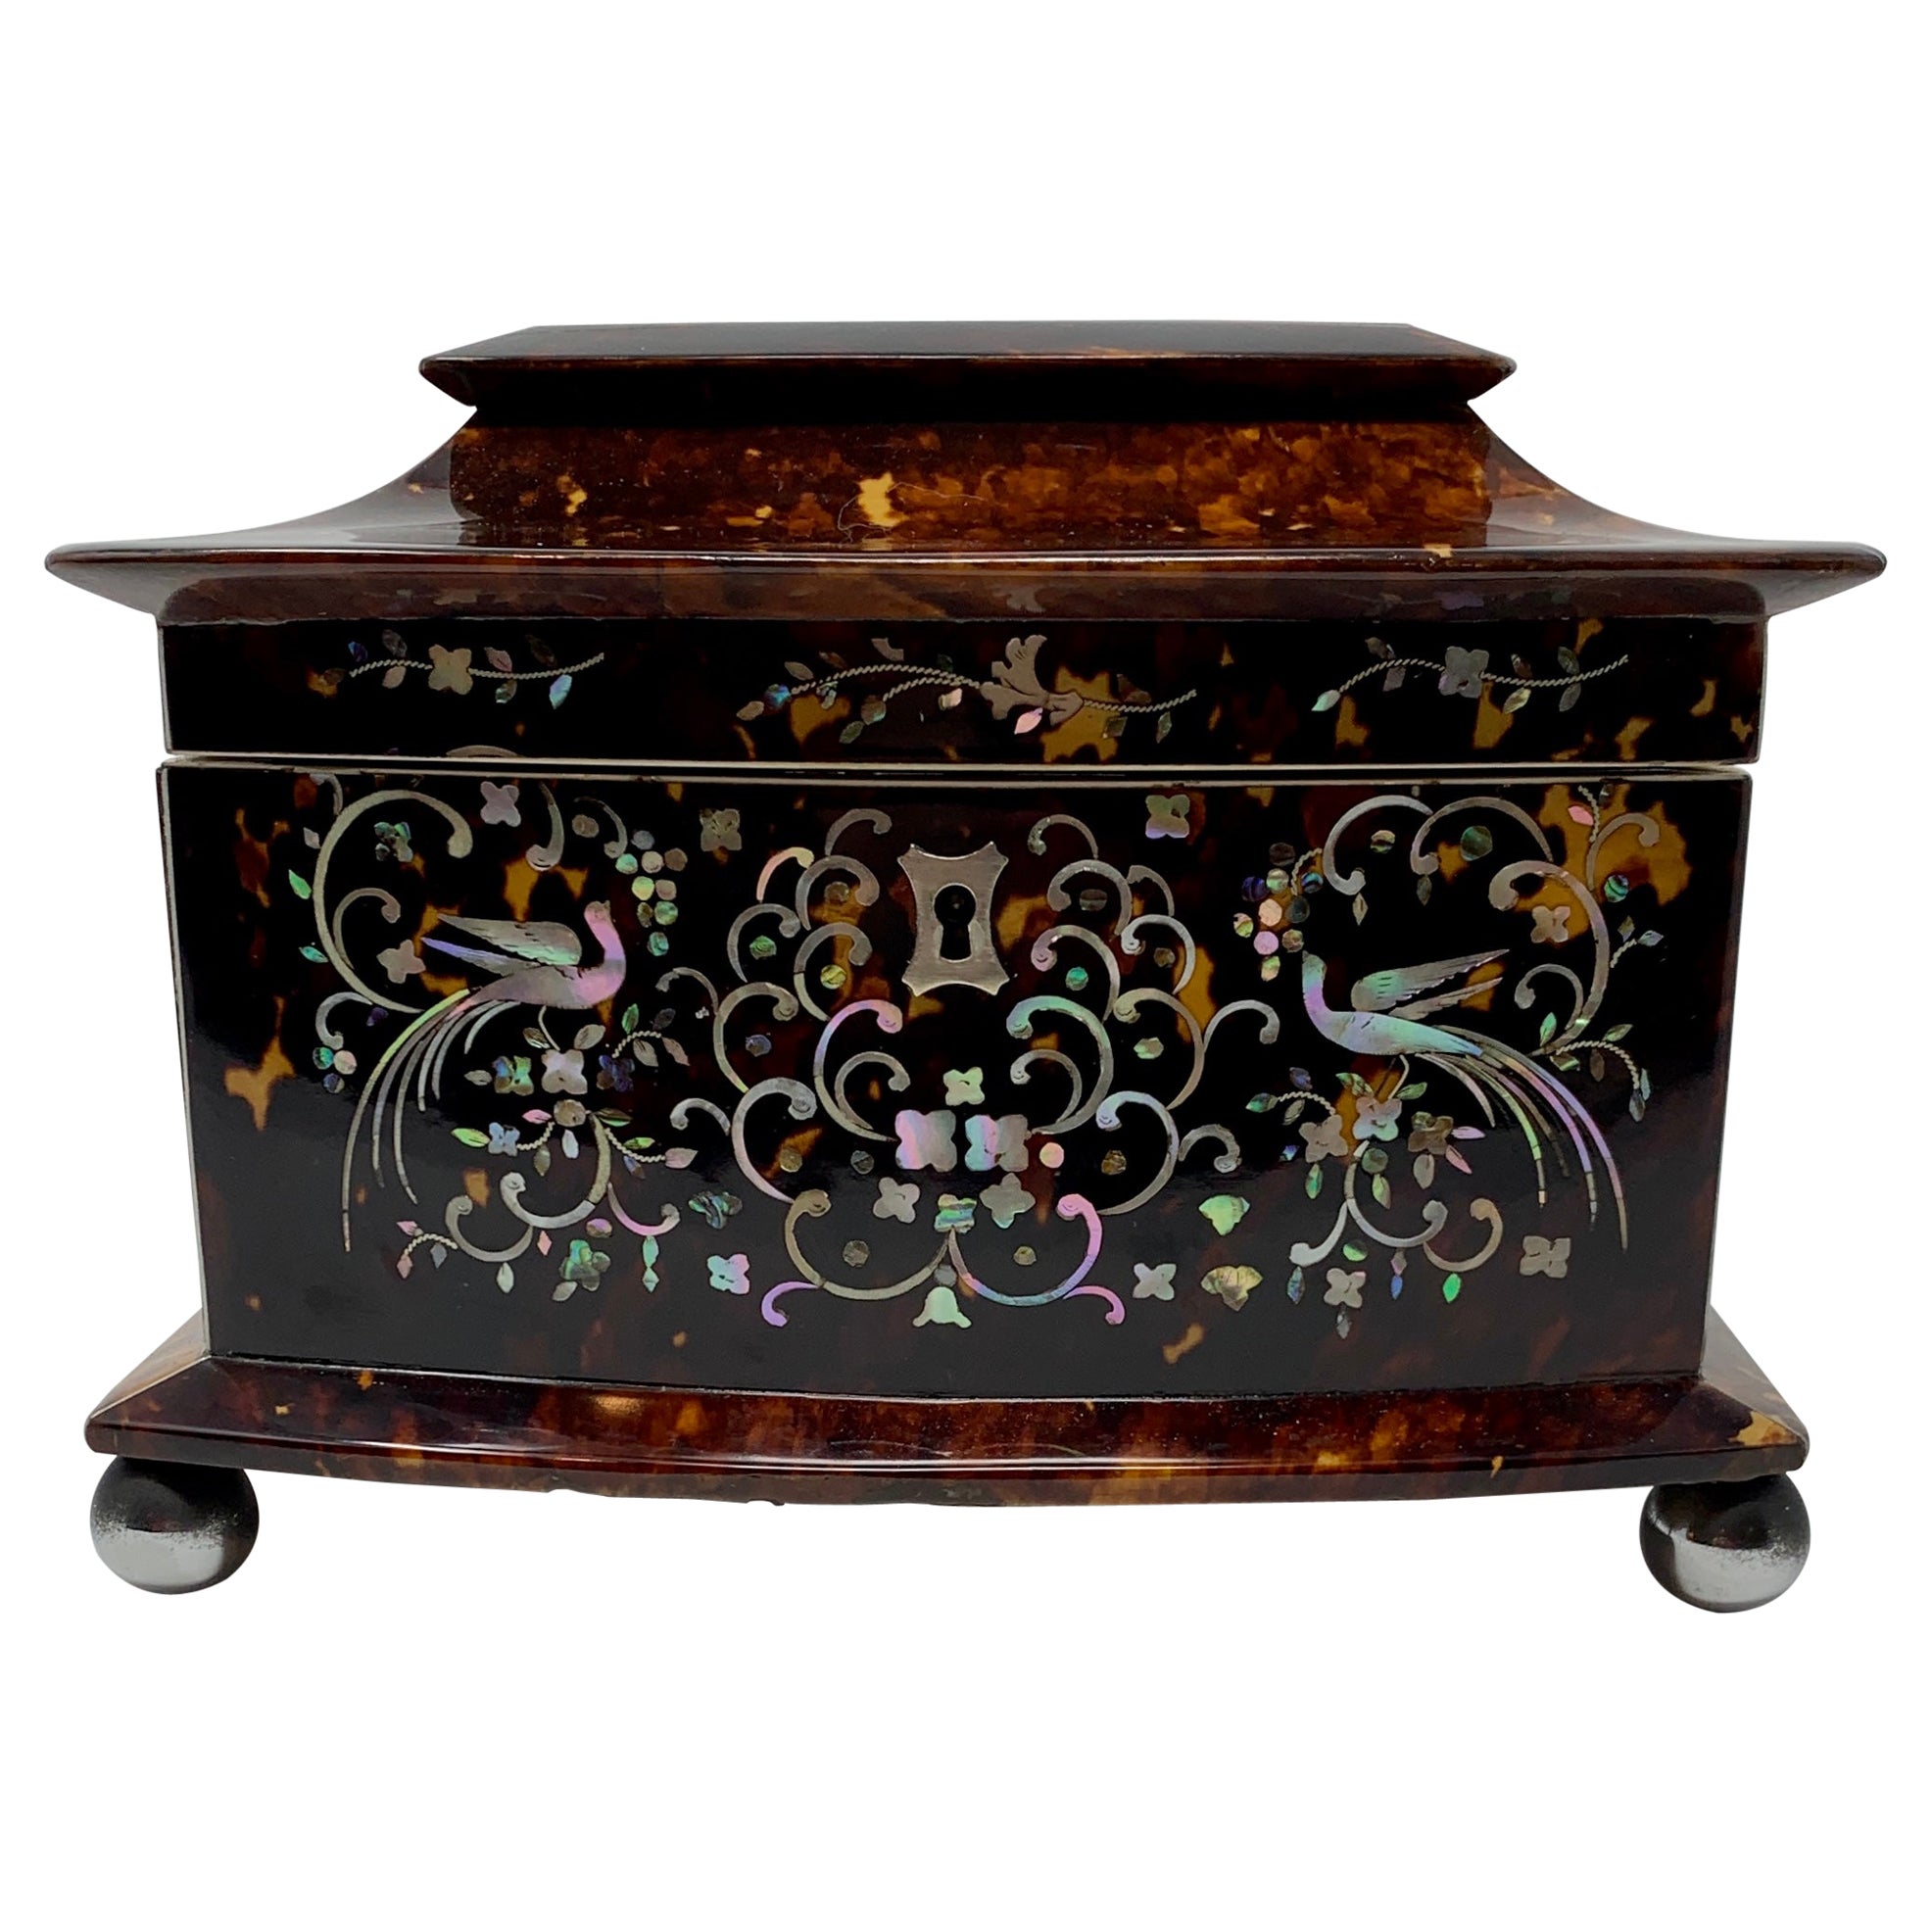 Antique English Tortoise Shell Tea Caddy with Inlaid Mother of Pearl circa 1870s